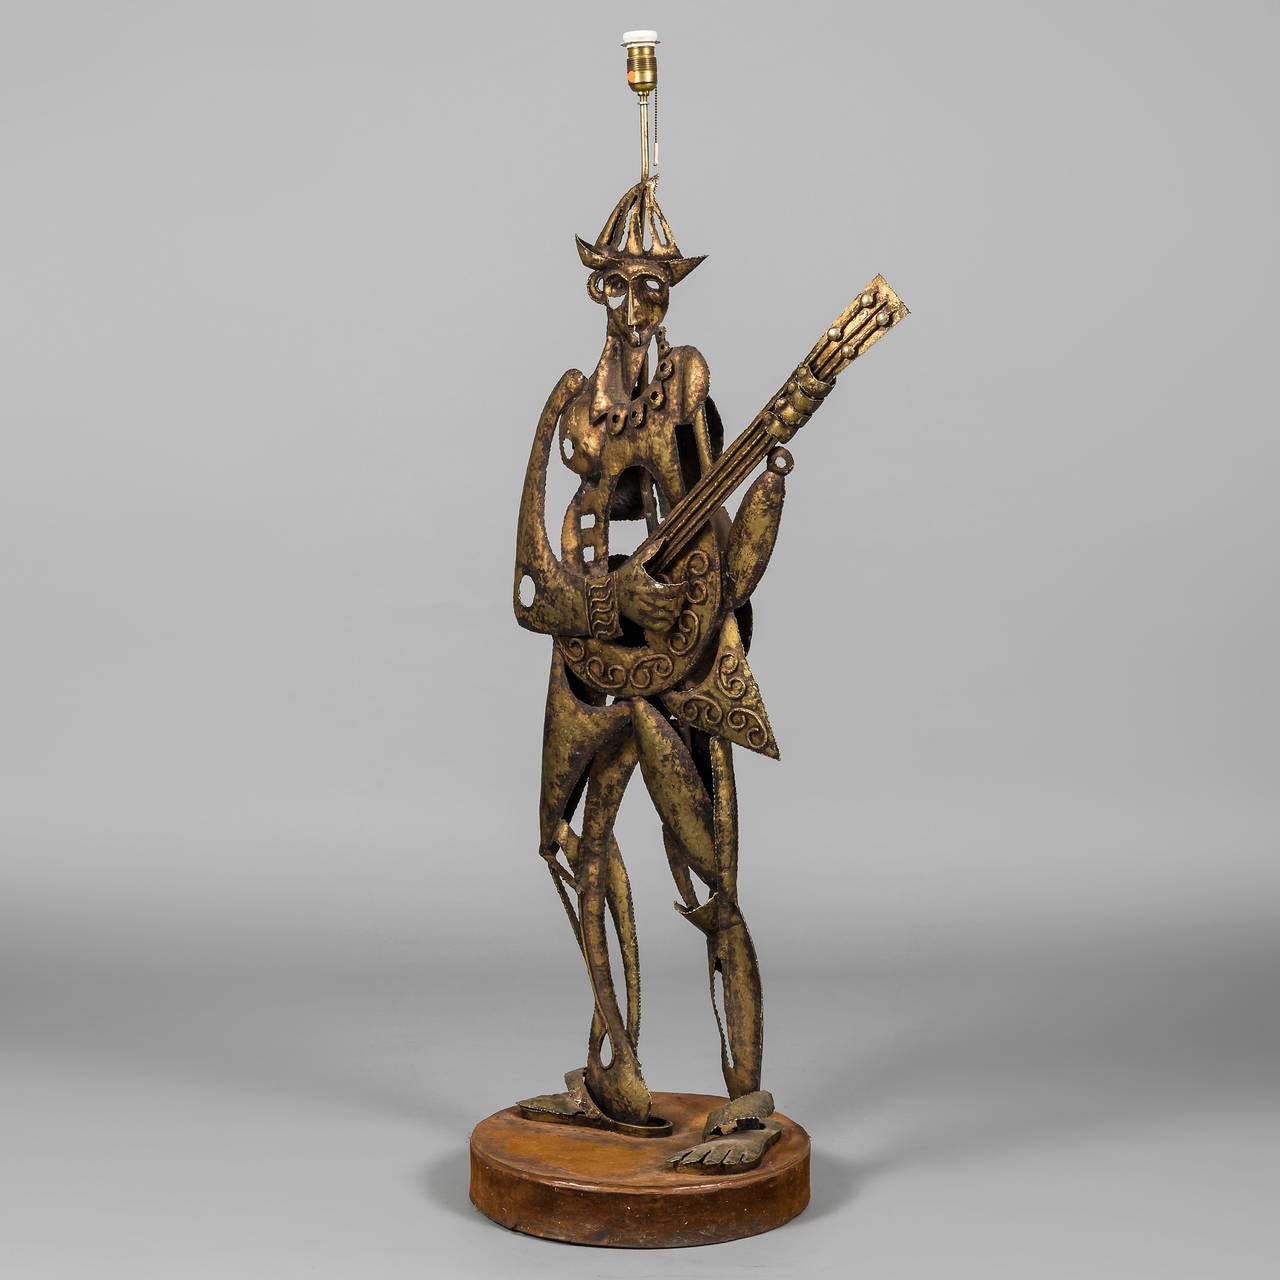 1950s Spanish floor lamp inspired by Picasso's Harlequin holding a guitar.